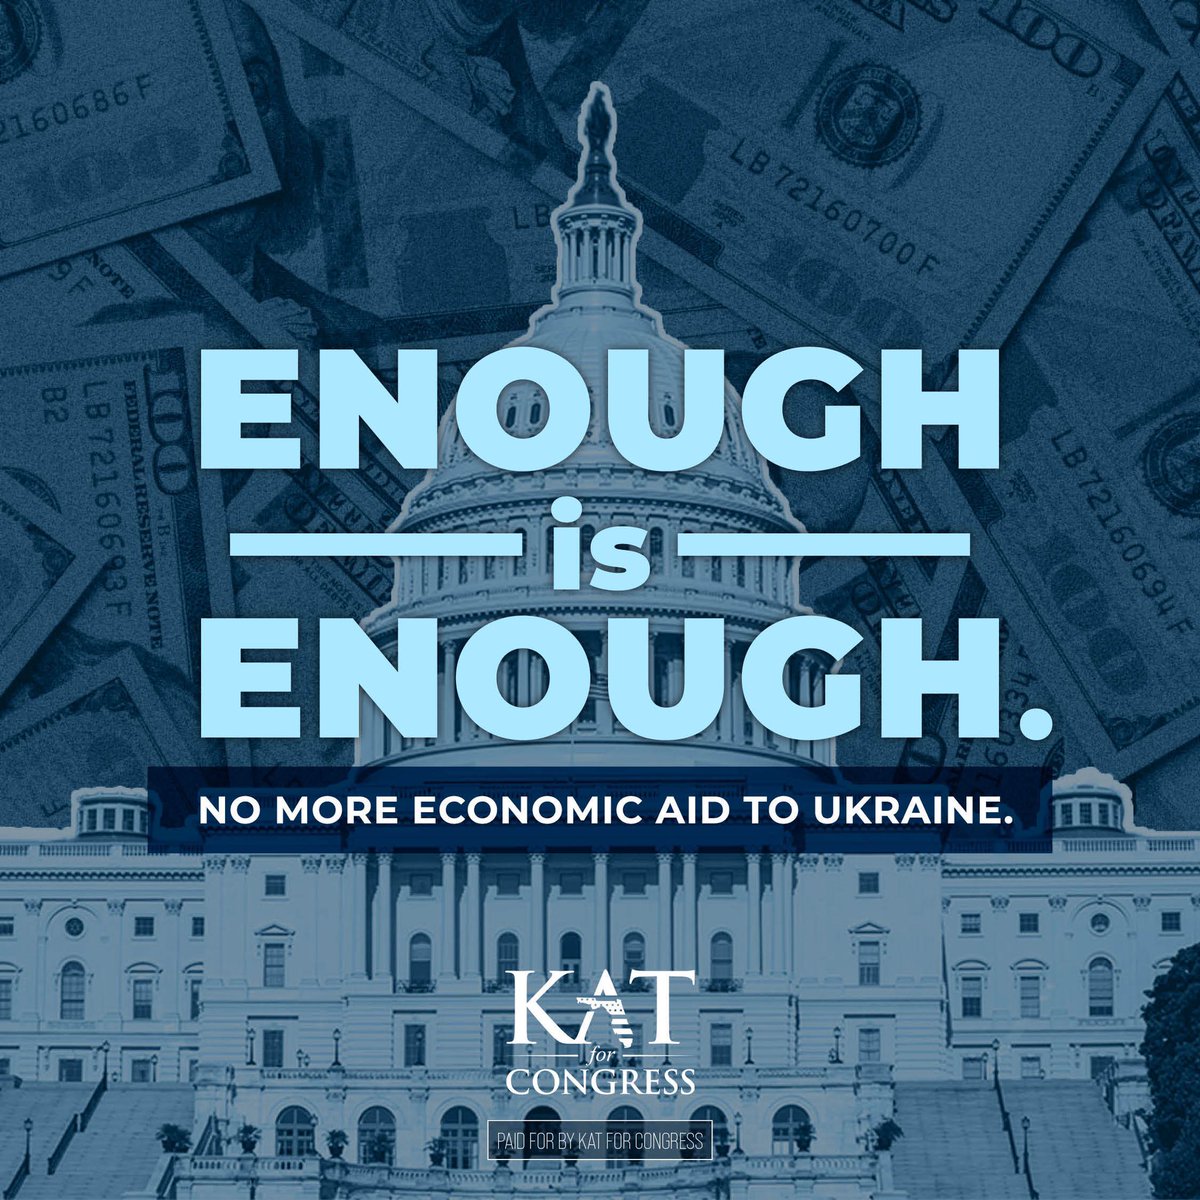 Enough is enough. This morning, my amendment to the Ukraine aid bill is on the House Floor. My amendment would cut $10.5B by eliminating all non-military funding in this bill, stopping the use of your hardworking taxpayer dollars to support Ukraine’s economy. Refugee